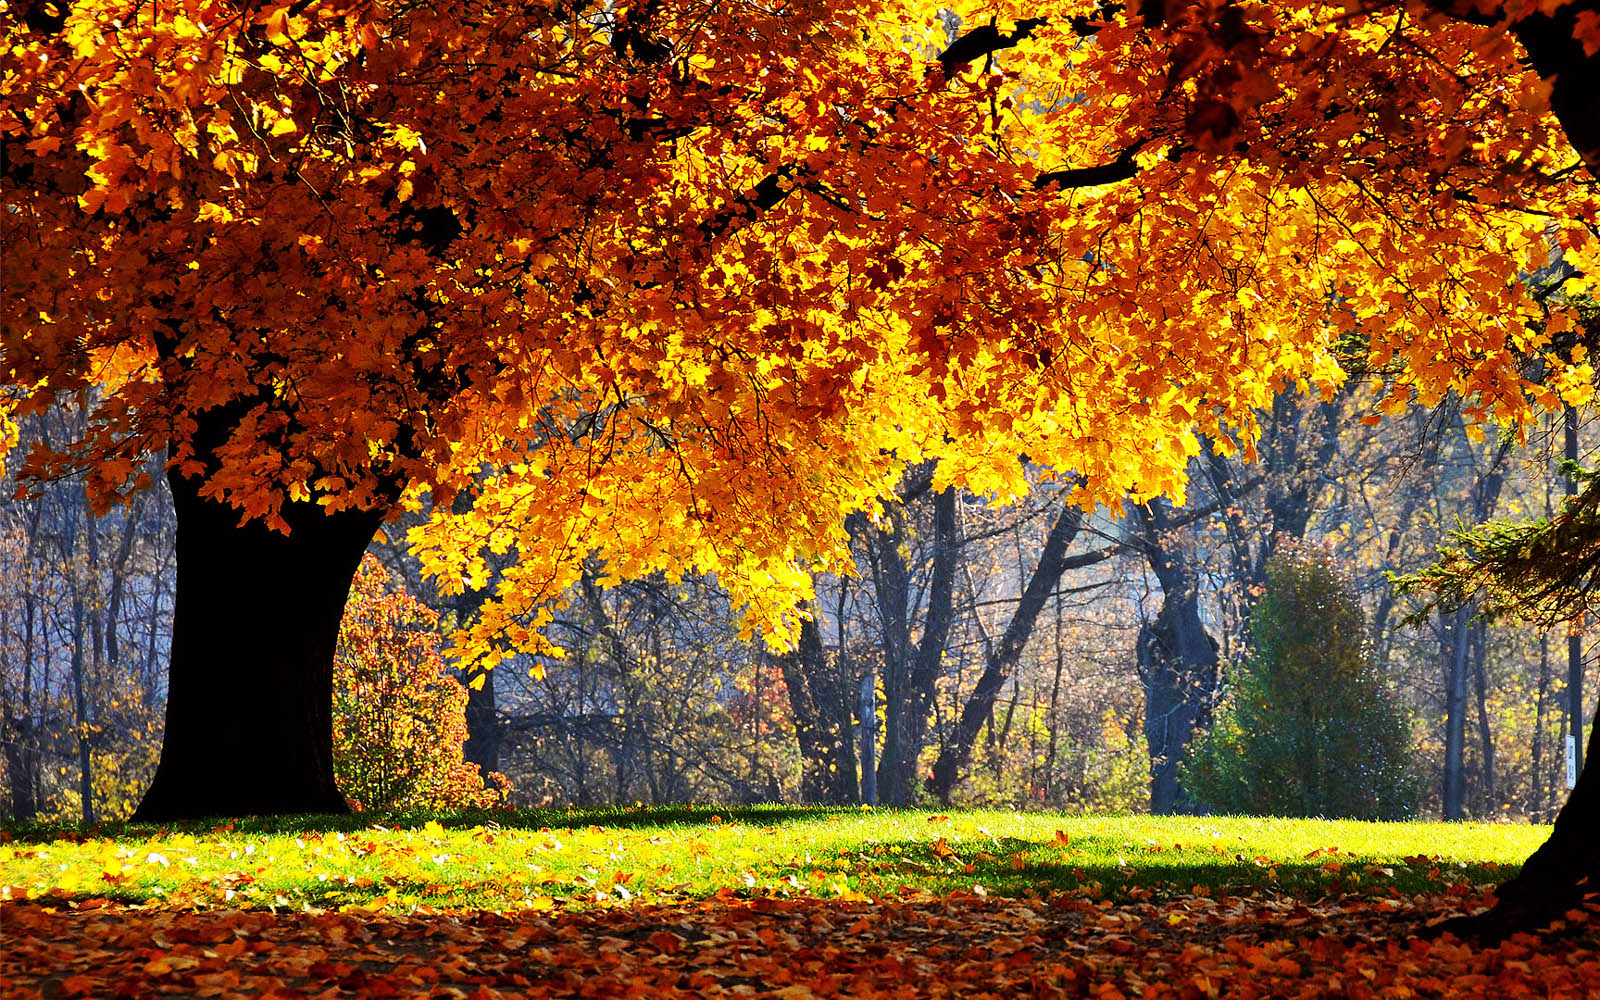 Tag Beautiful Autumn Scenery Wallpaper Background Photos Image